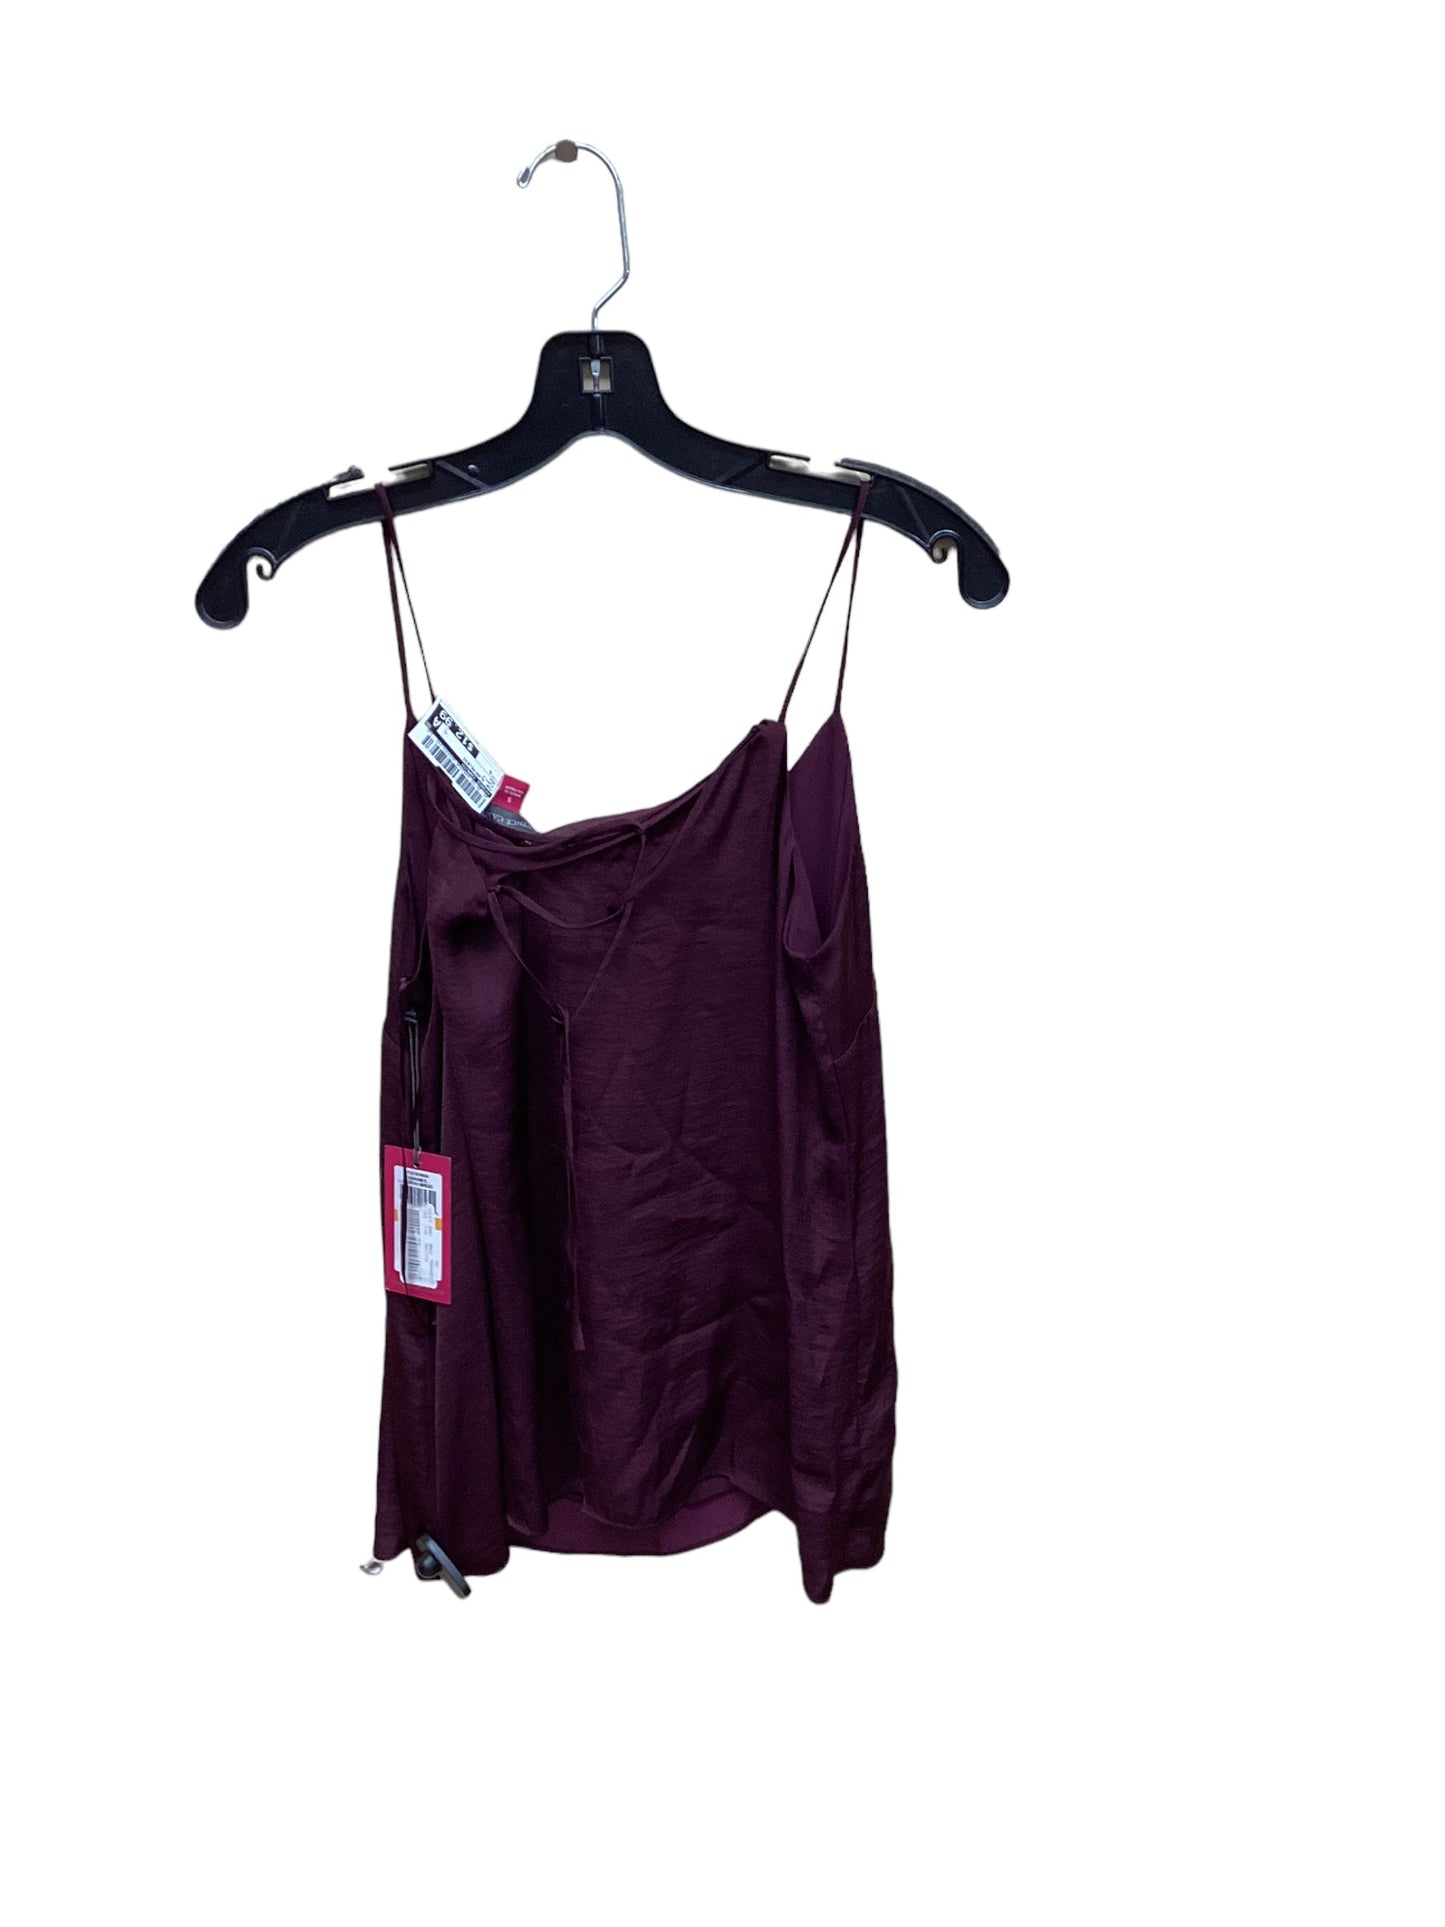 Top Sleeveless By Vince Camuto  Size: S